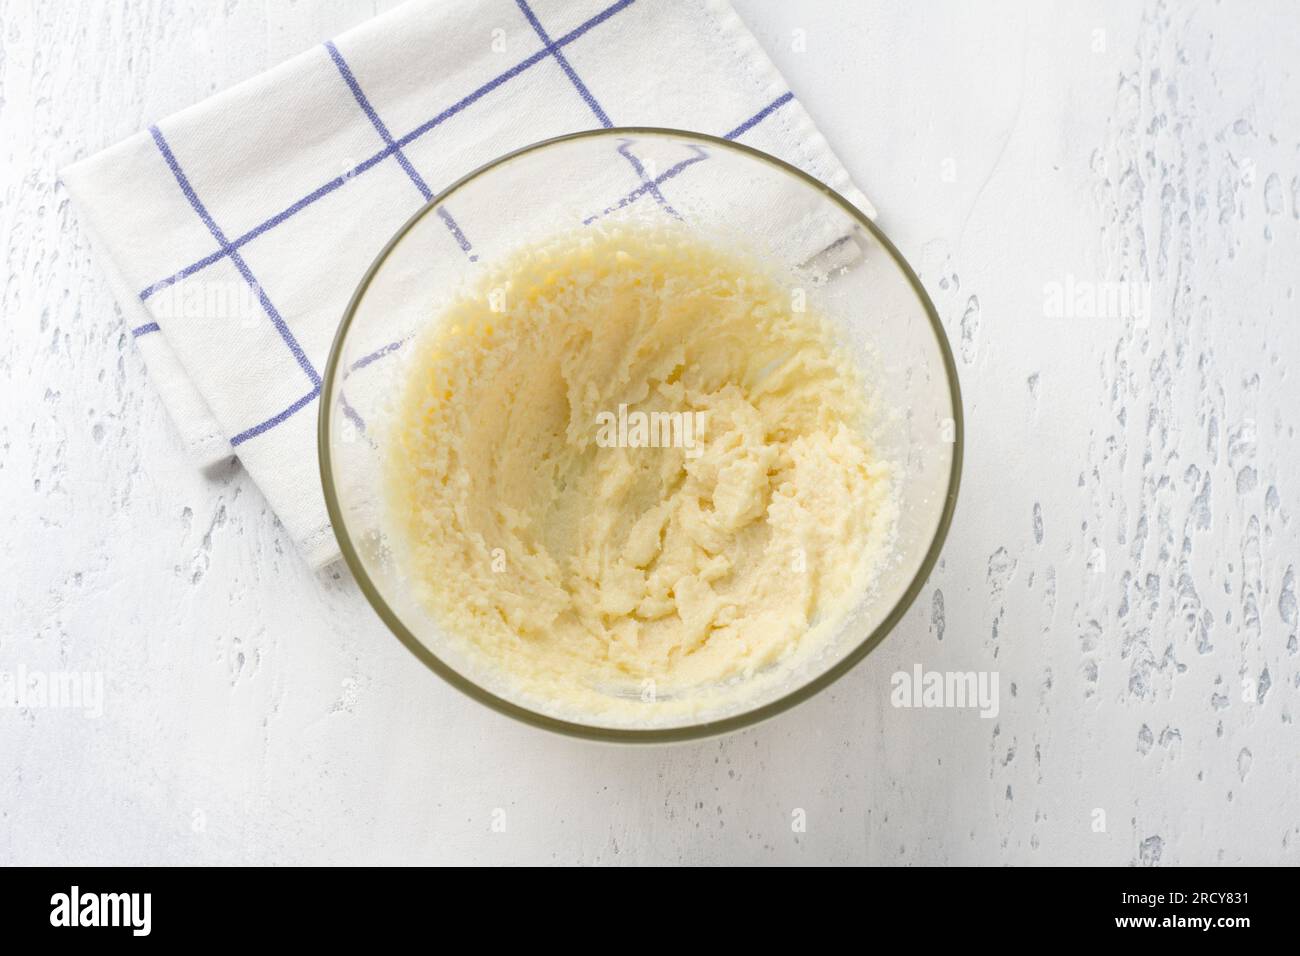 Glass bowl with whipped butter and sugar on a light blue background, top view. Cooking homemade milk cakes, do it yourself, step by step, step 2. Stock Photo